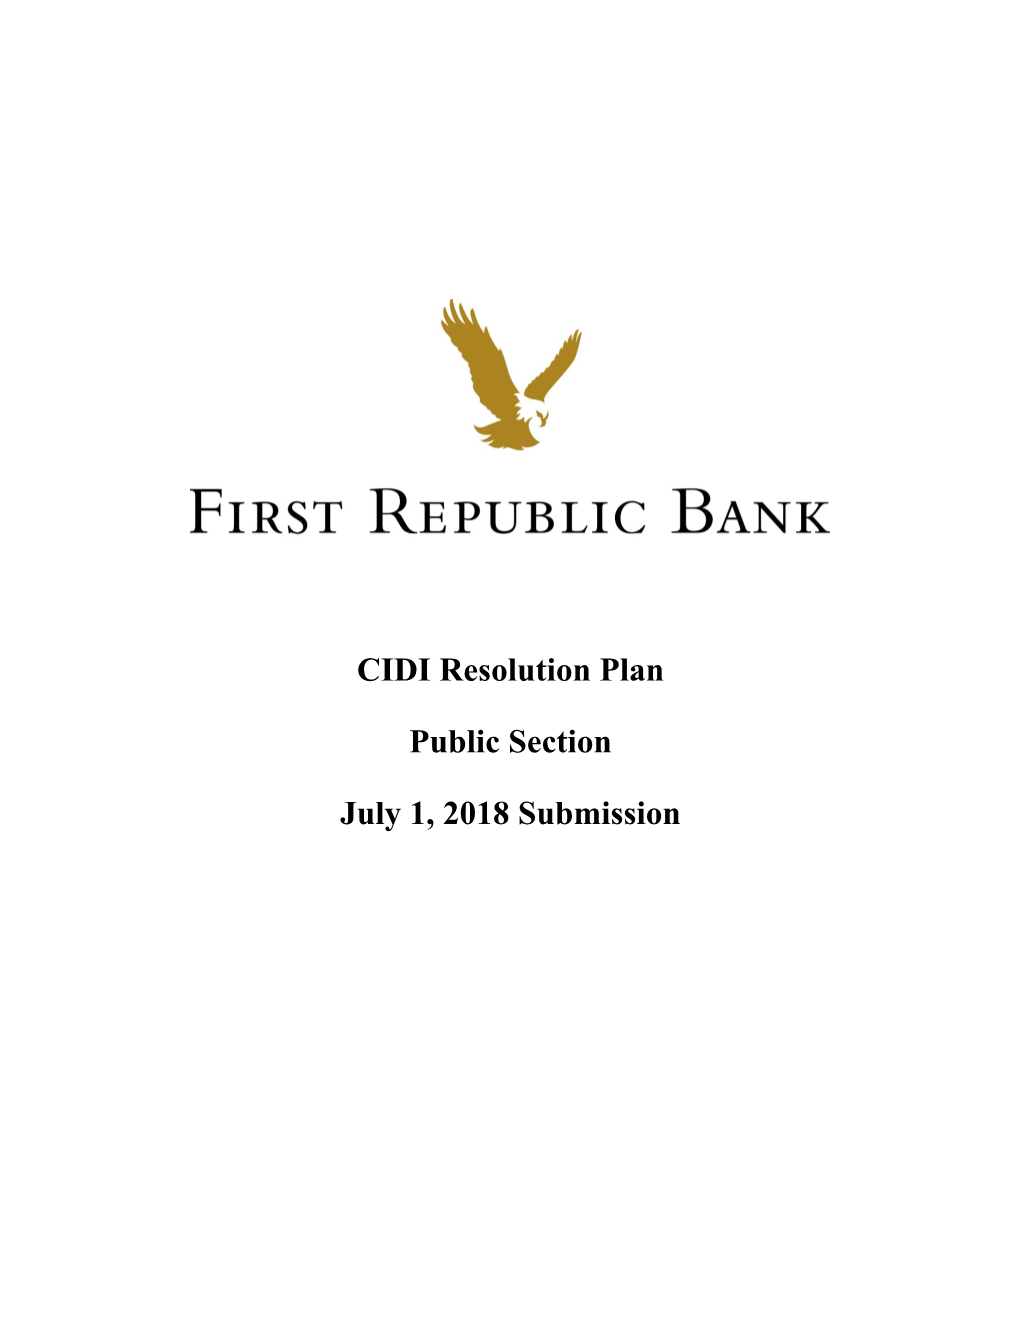 CIDI Resolution Plan Public Section July 1, 2018 Submission